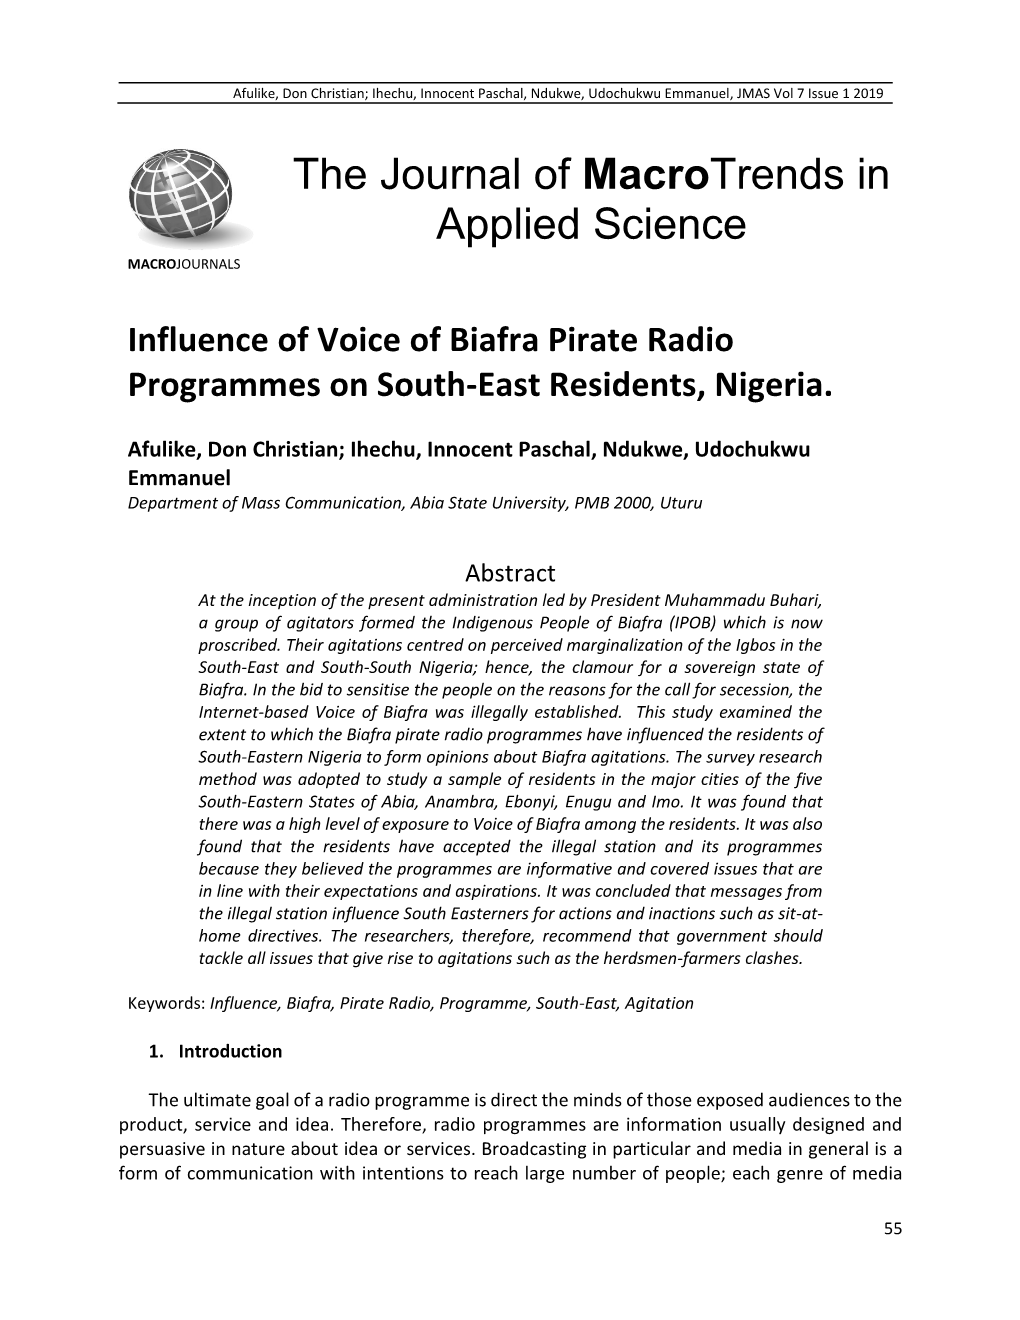 Influence of Voice of Biafra Pirate Radio Programmes on South-East Residents, Nigeria